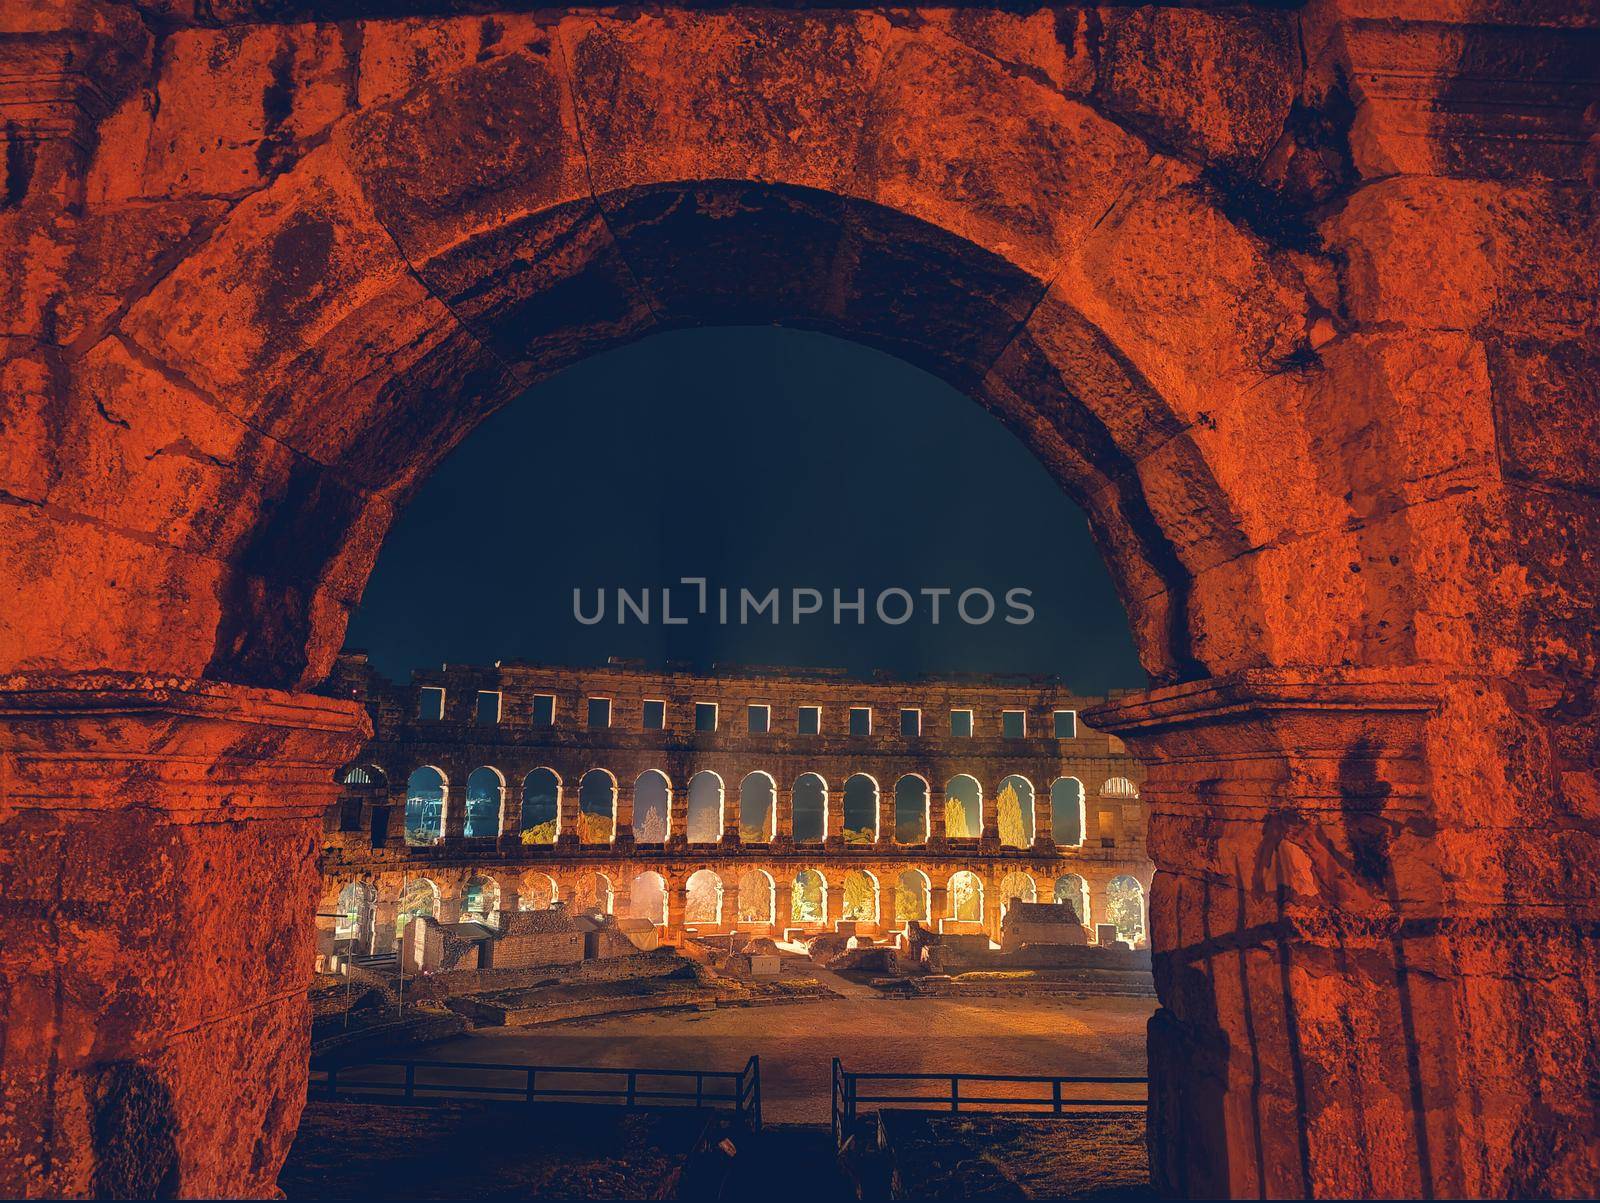 Croatia. Pula. Ruins of the best preserved Roman amphitheatre built in the first century AD during the reign of the Emperor Vespasian shot at night by kasto